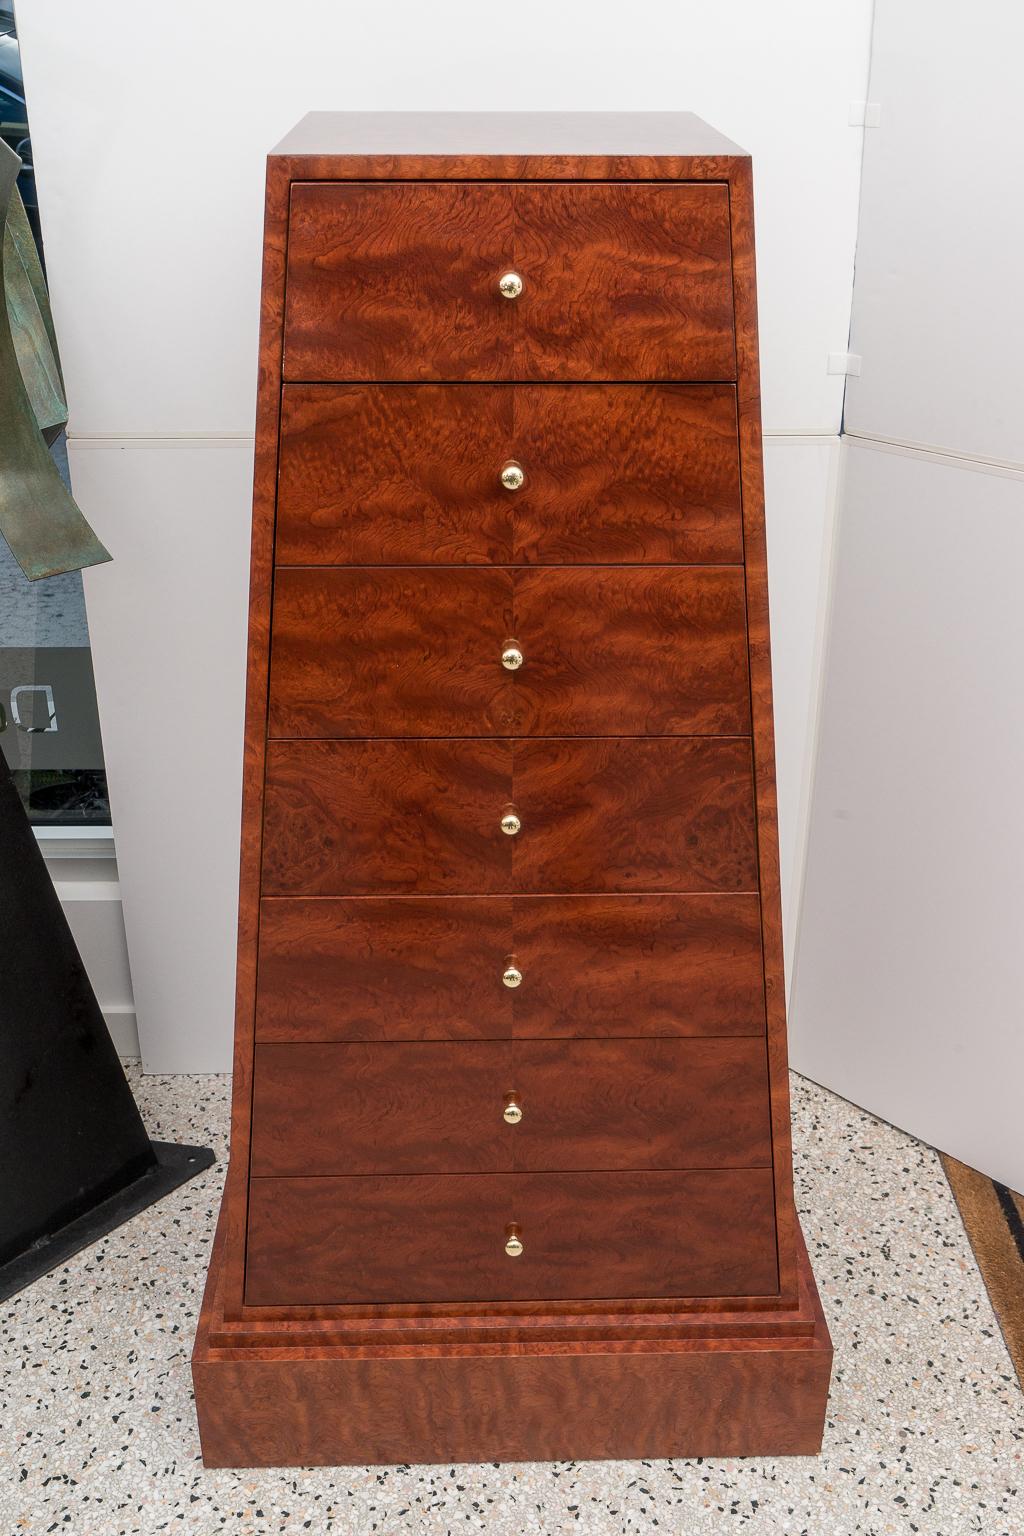 This stylish set of custom made obelisk-form semainier date to the 1980s and were acquired from a Palm Beach estate. The burl wood has an exotic grain and it gives the clean, simple lines of the cabinets a bit of drama. 

Note: One of the cabinets